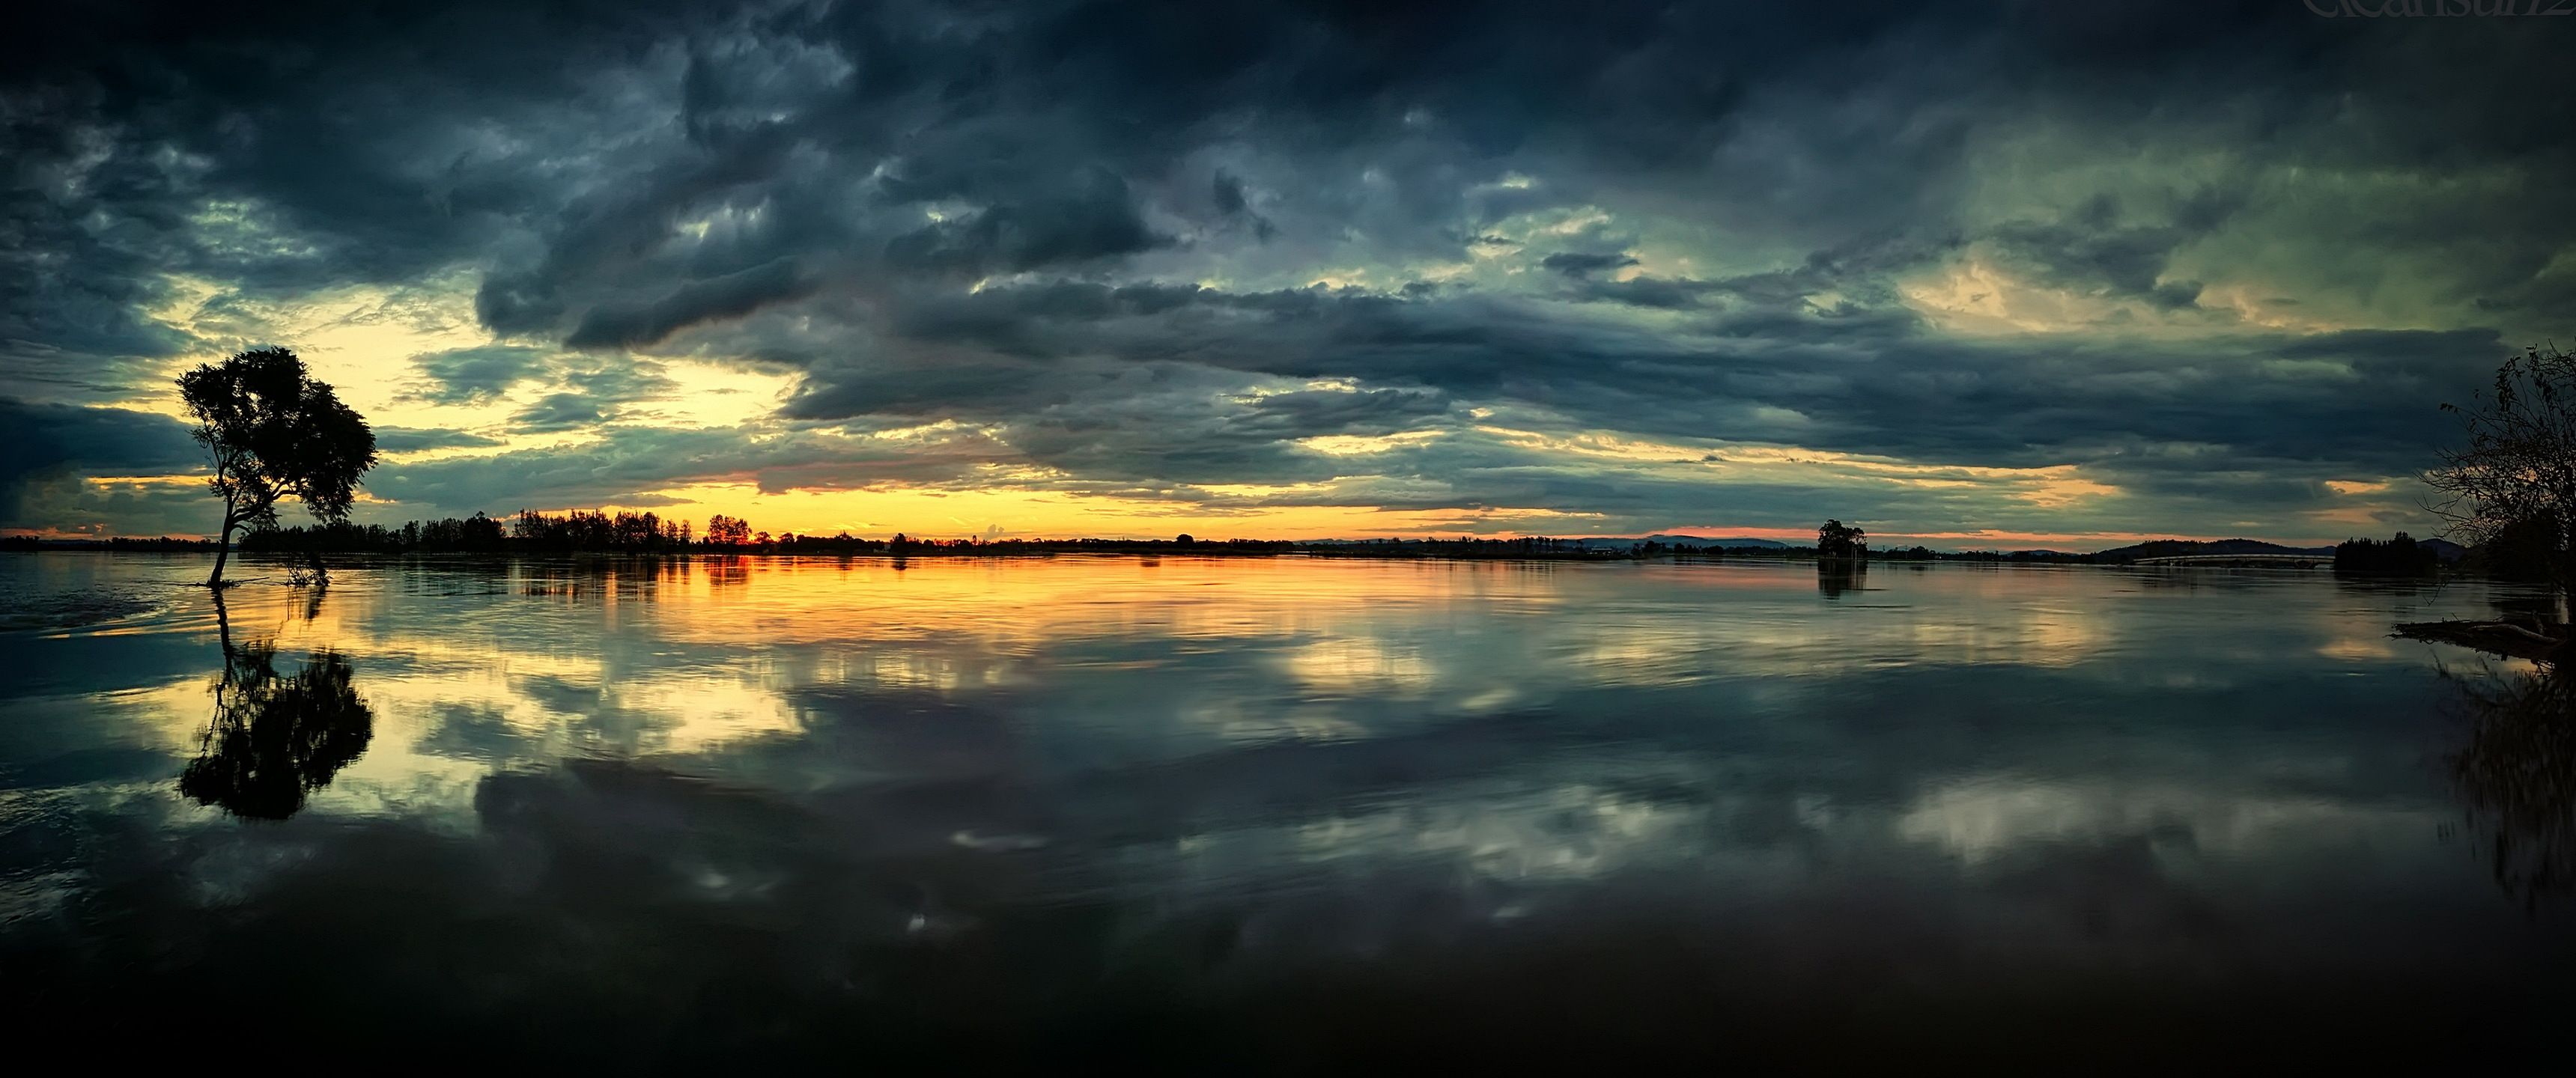 A dramatic sunset over a lake with a tree in the middle. - 3440x1440